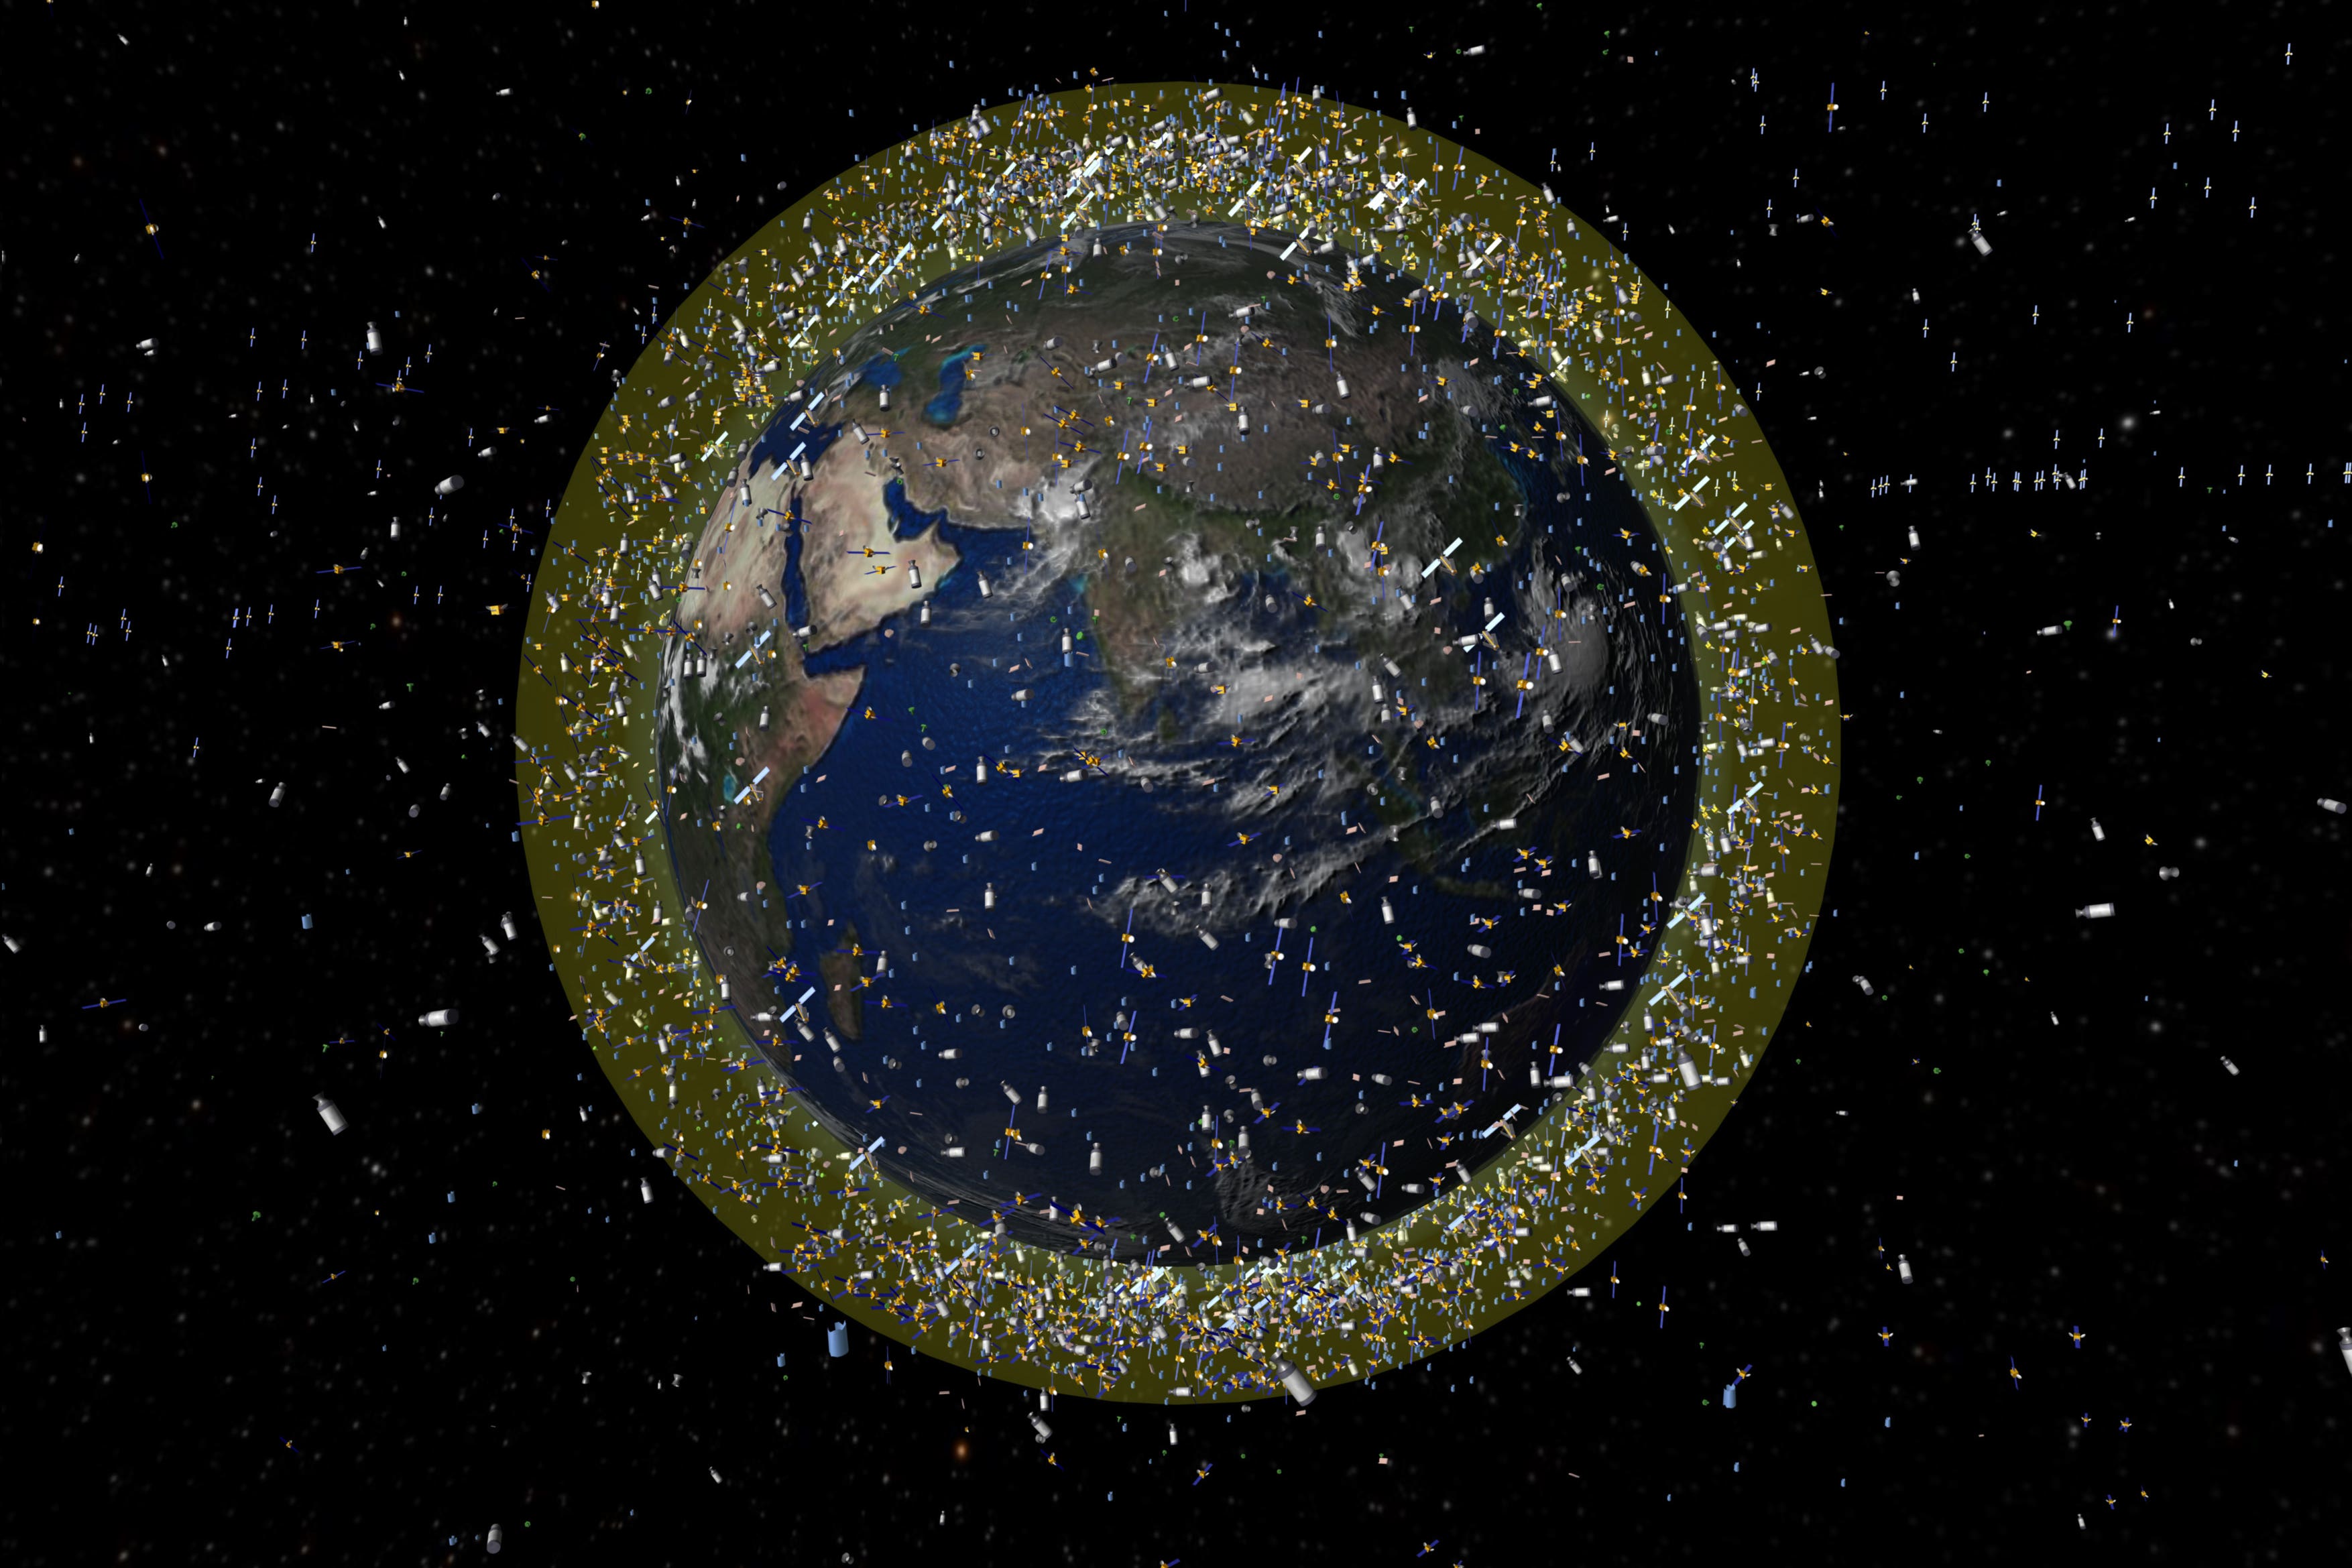 A visualisation created by the European Space Agency (ESA) of space debris orbiting Earth